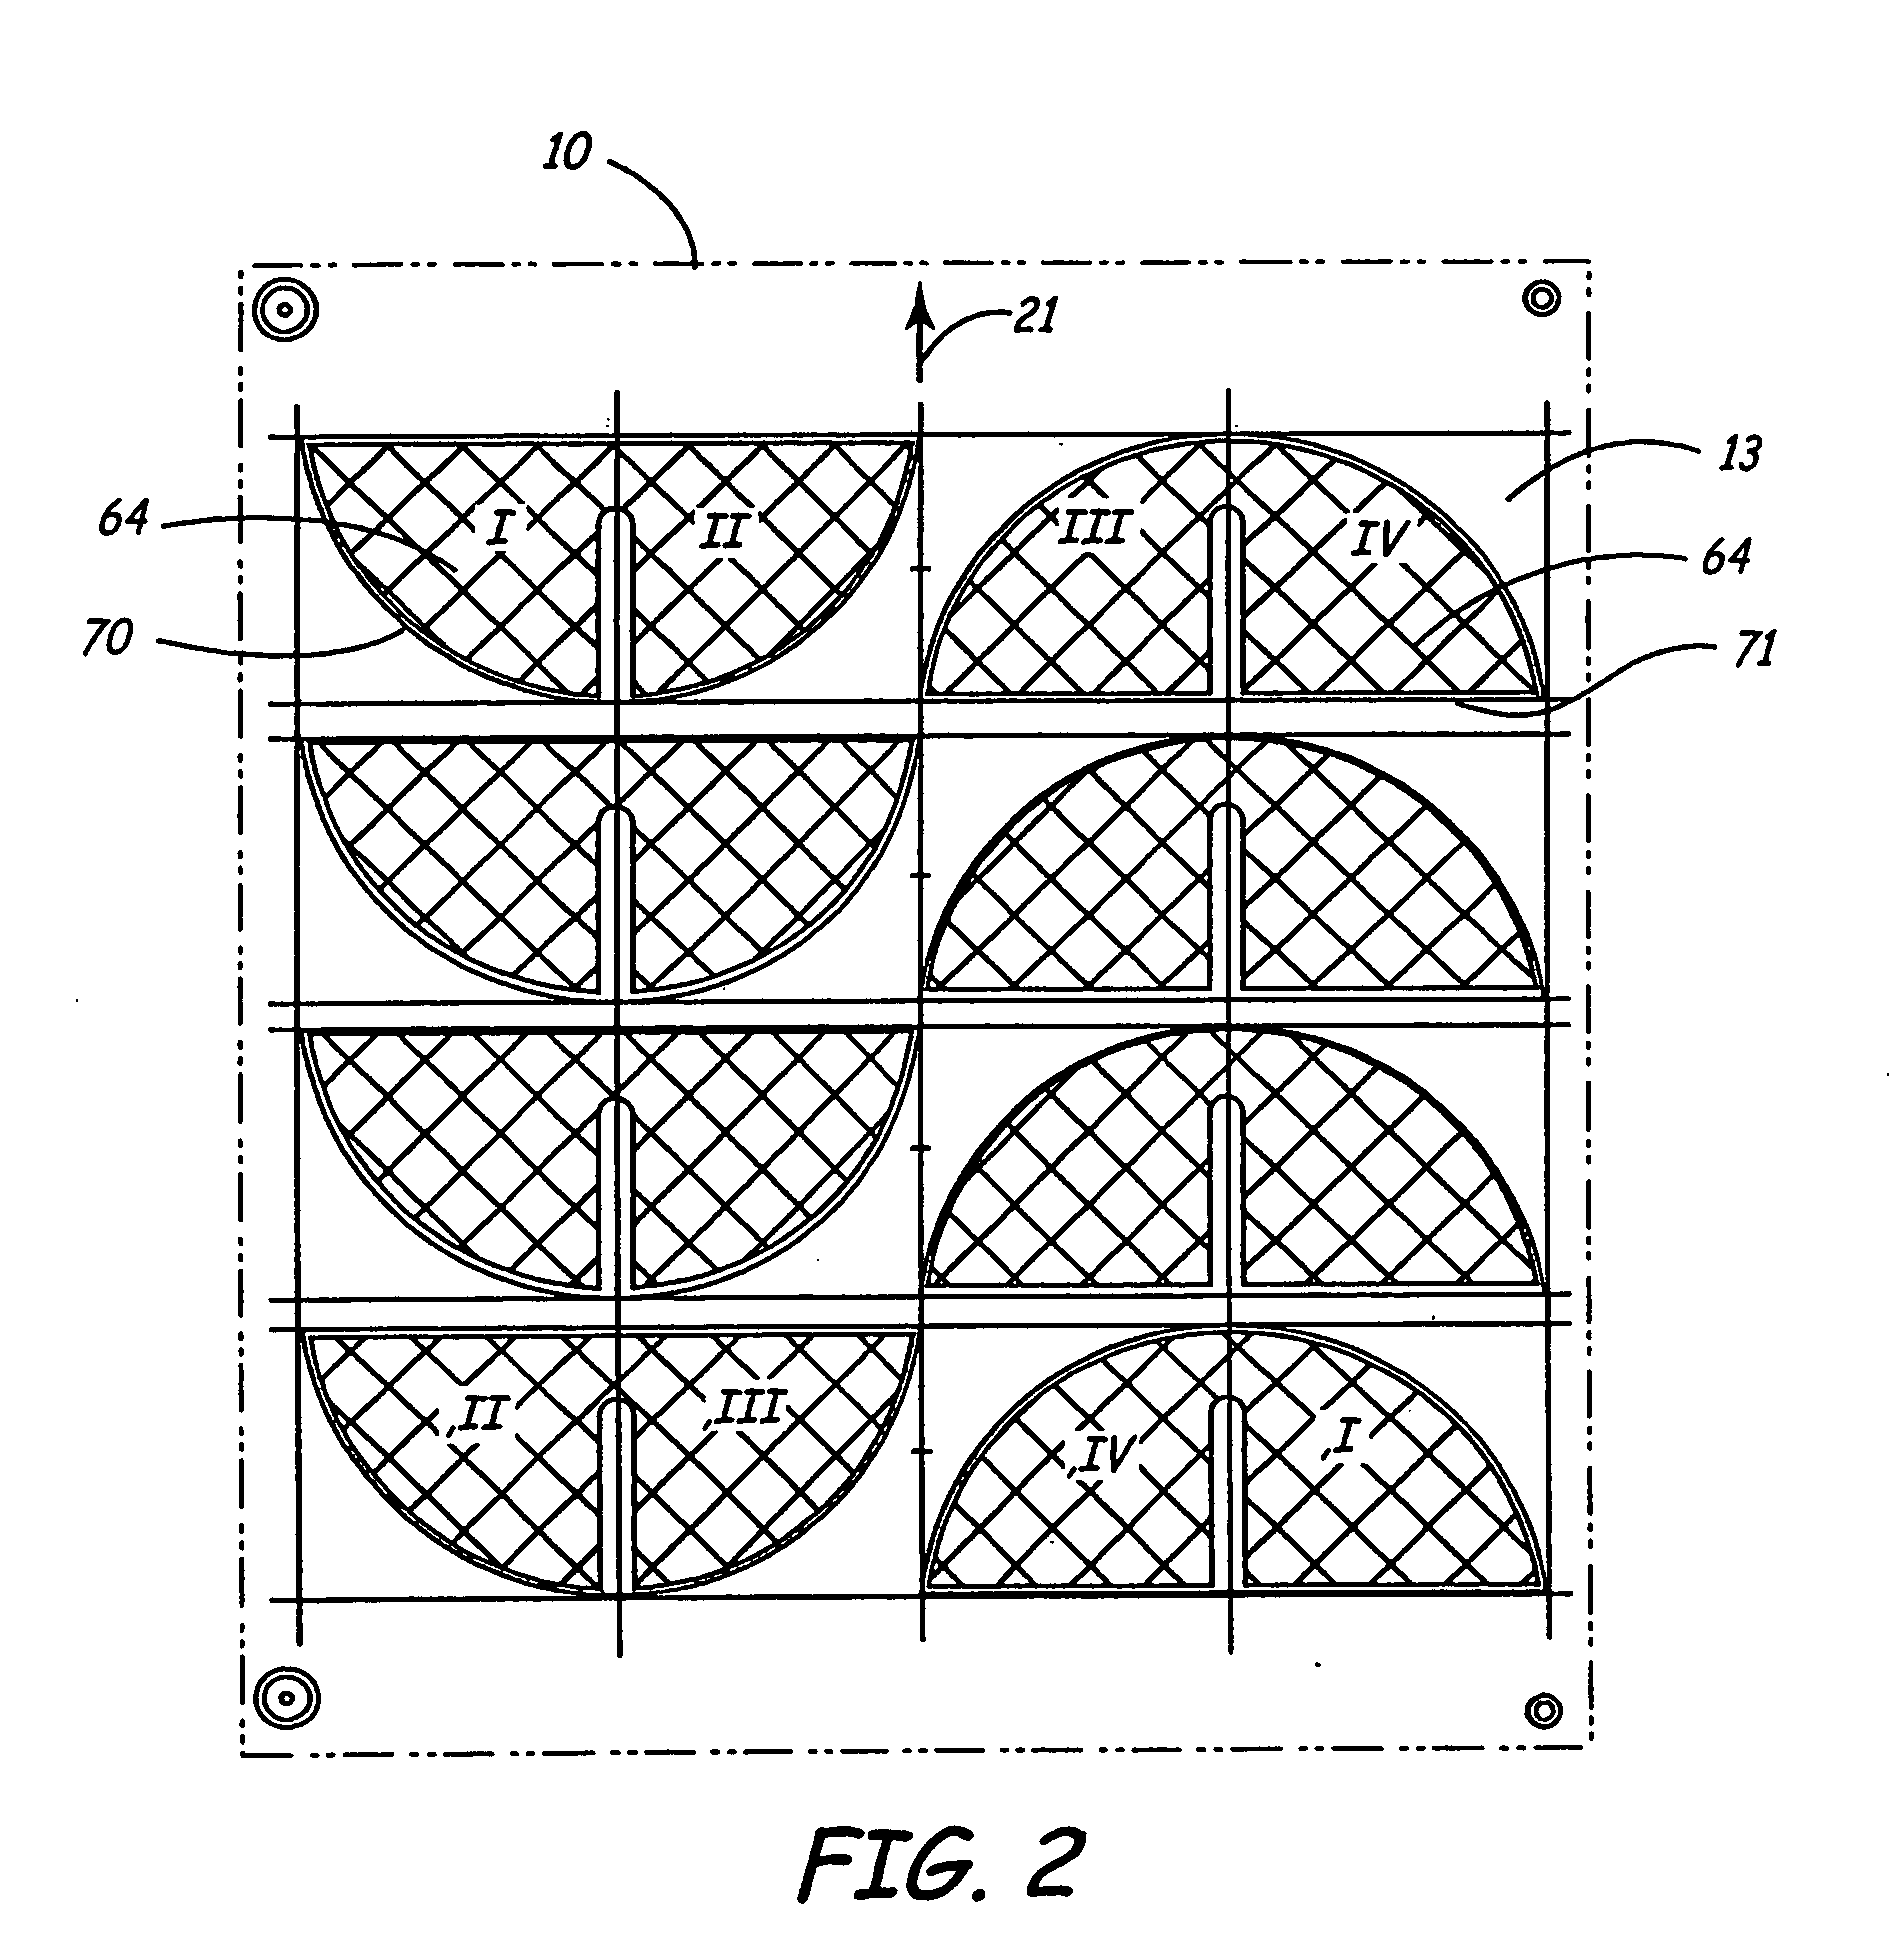 Complex-shaped ceramic capacitors for implantable cardioverter defibrillators and method of manufacture